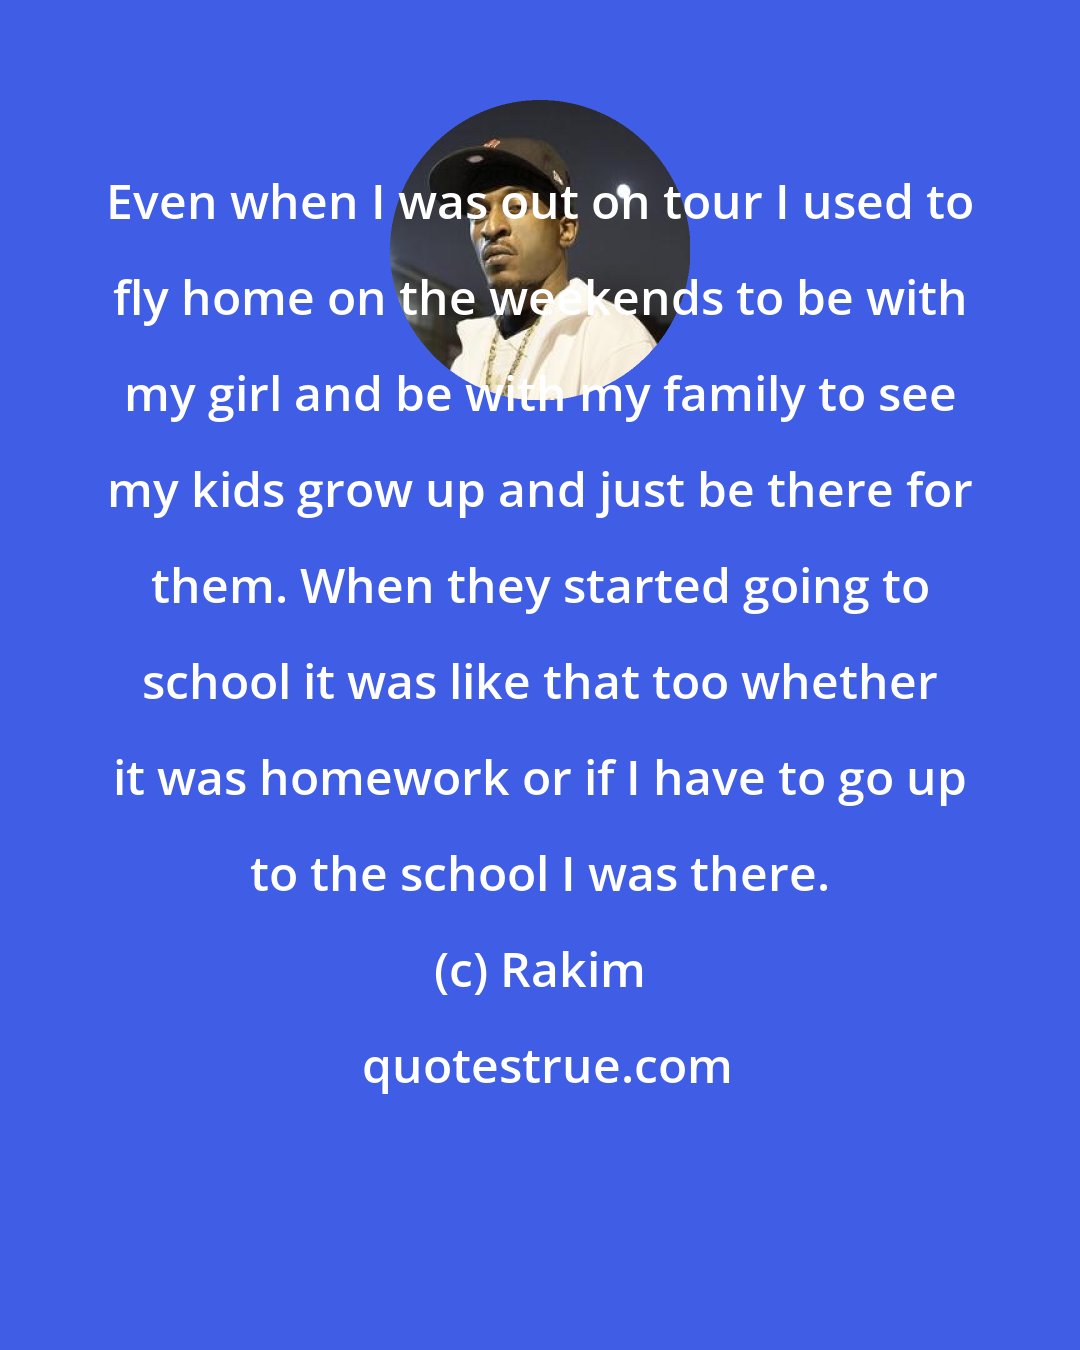 Rakim: Even when I was out on tour I used to fly home on the weekends to be with my girl and be with my family to see my kids grow up and just be there for them. When they started going to school it was like that too whether it was homework or if I have to go up to the school I was there.